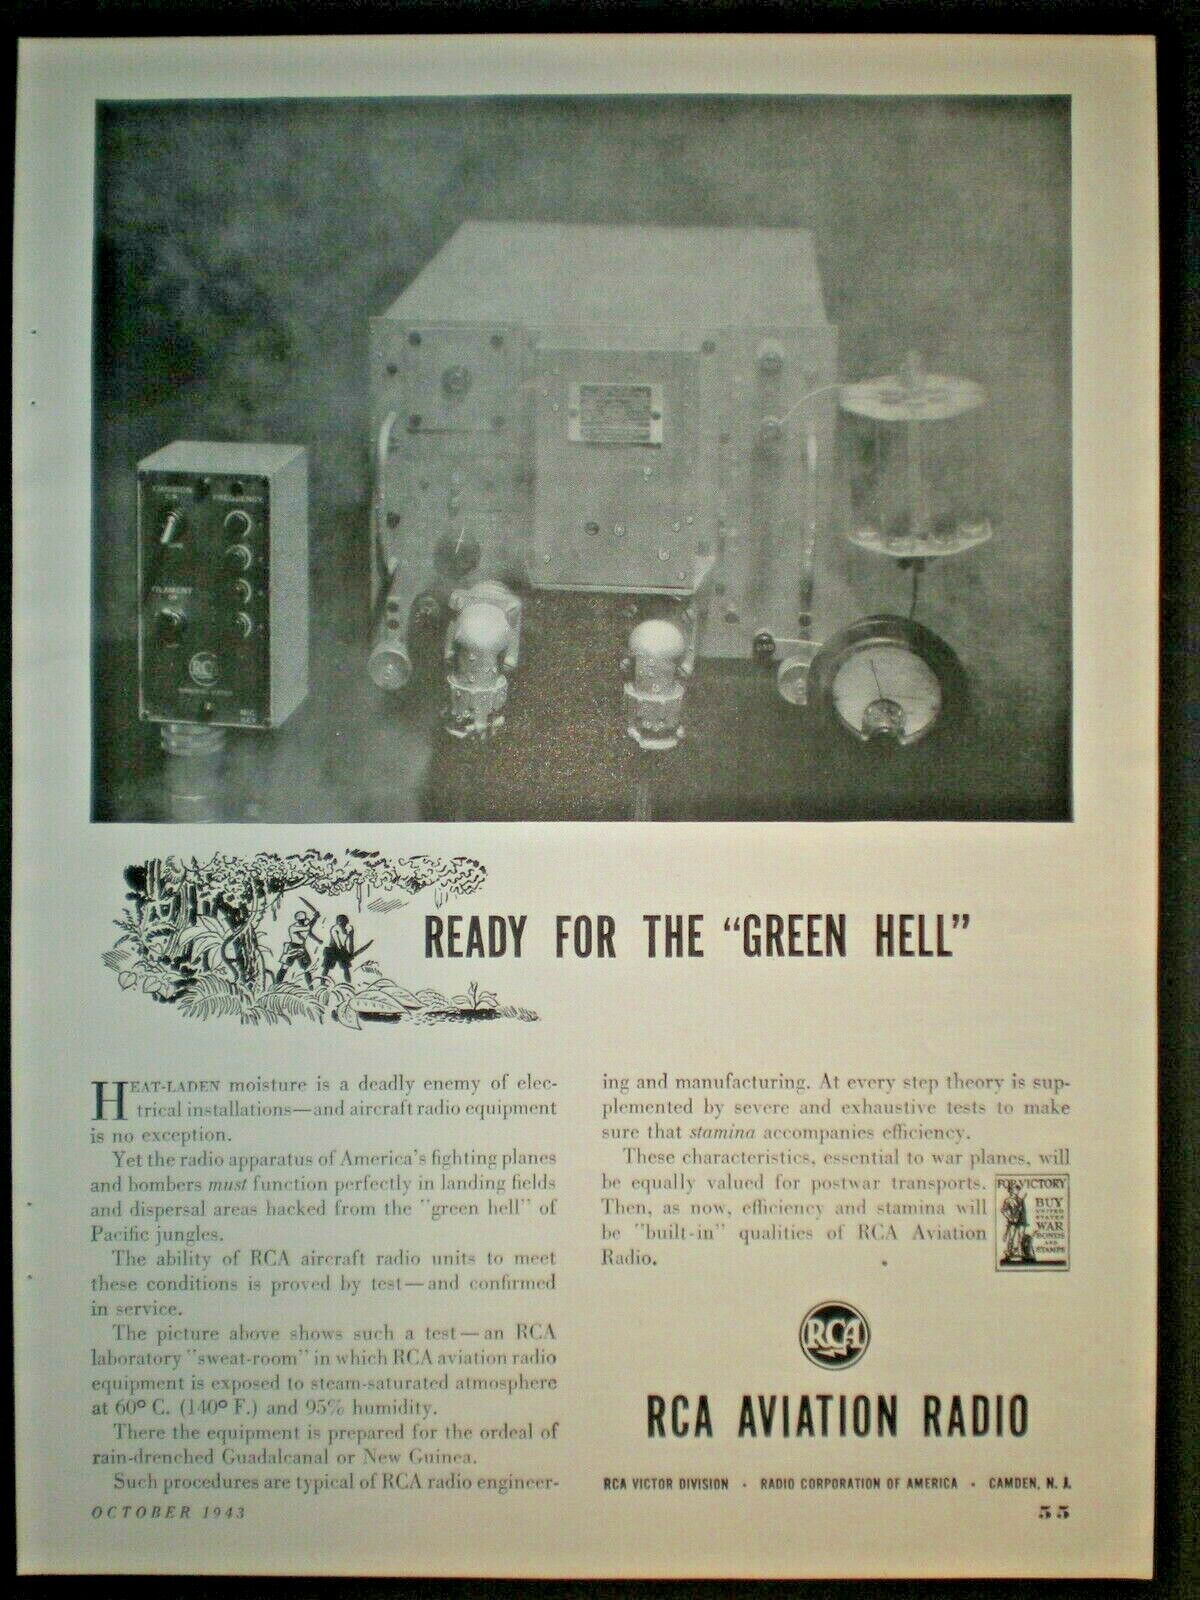 1943 READY FOR THE GREEN HELL WWII vintage RCA AVIATION RADIO  Trade print ad